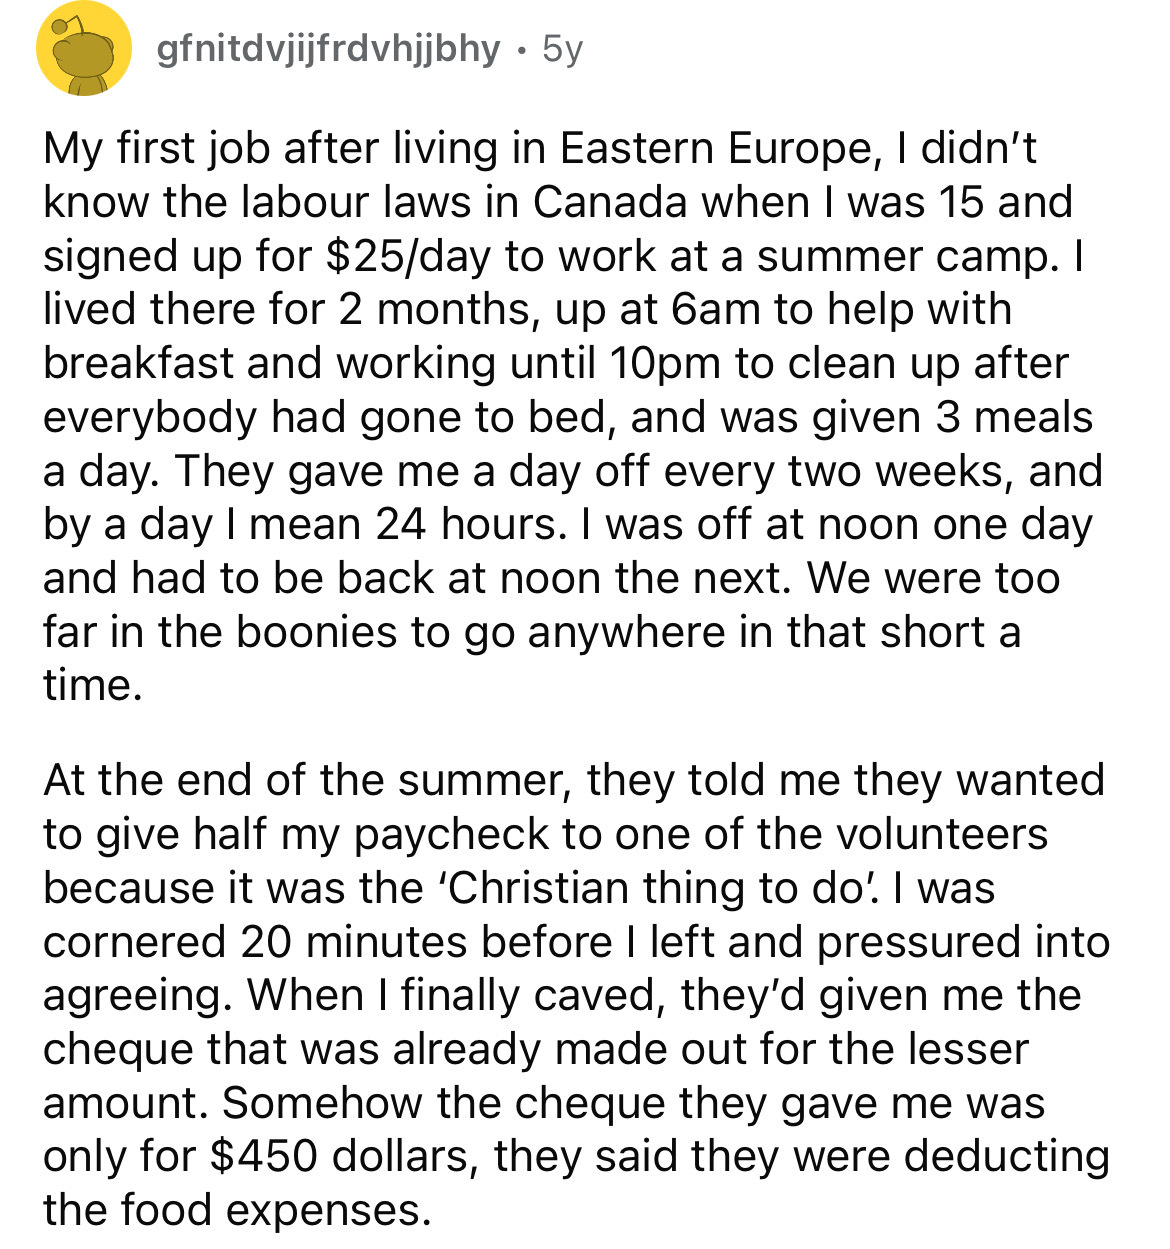 document - gfnitdvjijfrdvhjjbhy 5y My first job after living in Eastern Europe, I didn't know the labour laws in Canada when I was 15 and signed up for $25day to work at a summer camp. I lived there for 2 months, up at 6am to help with breakfast and worki